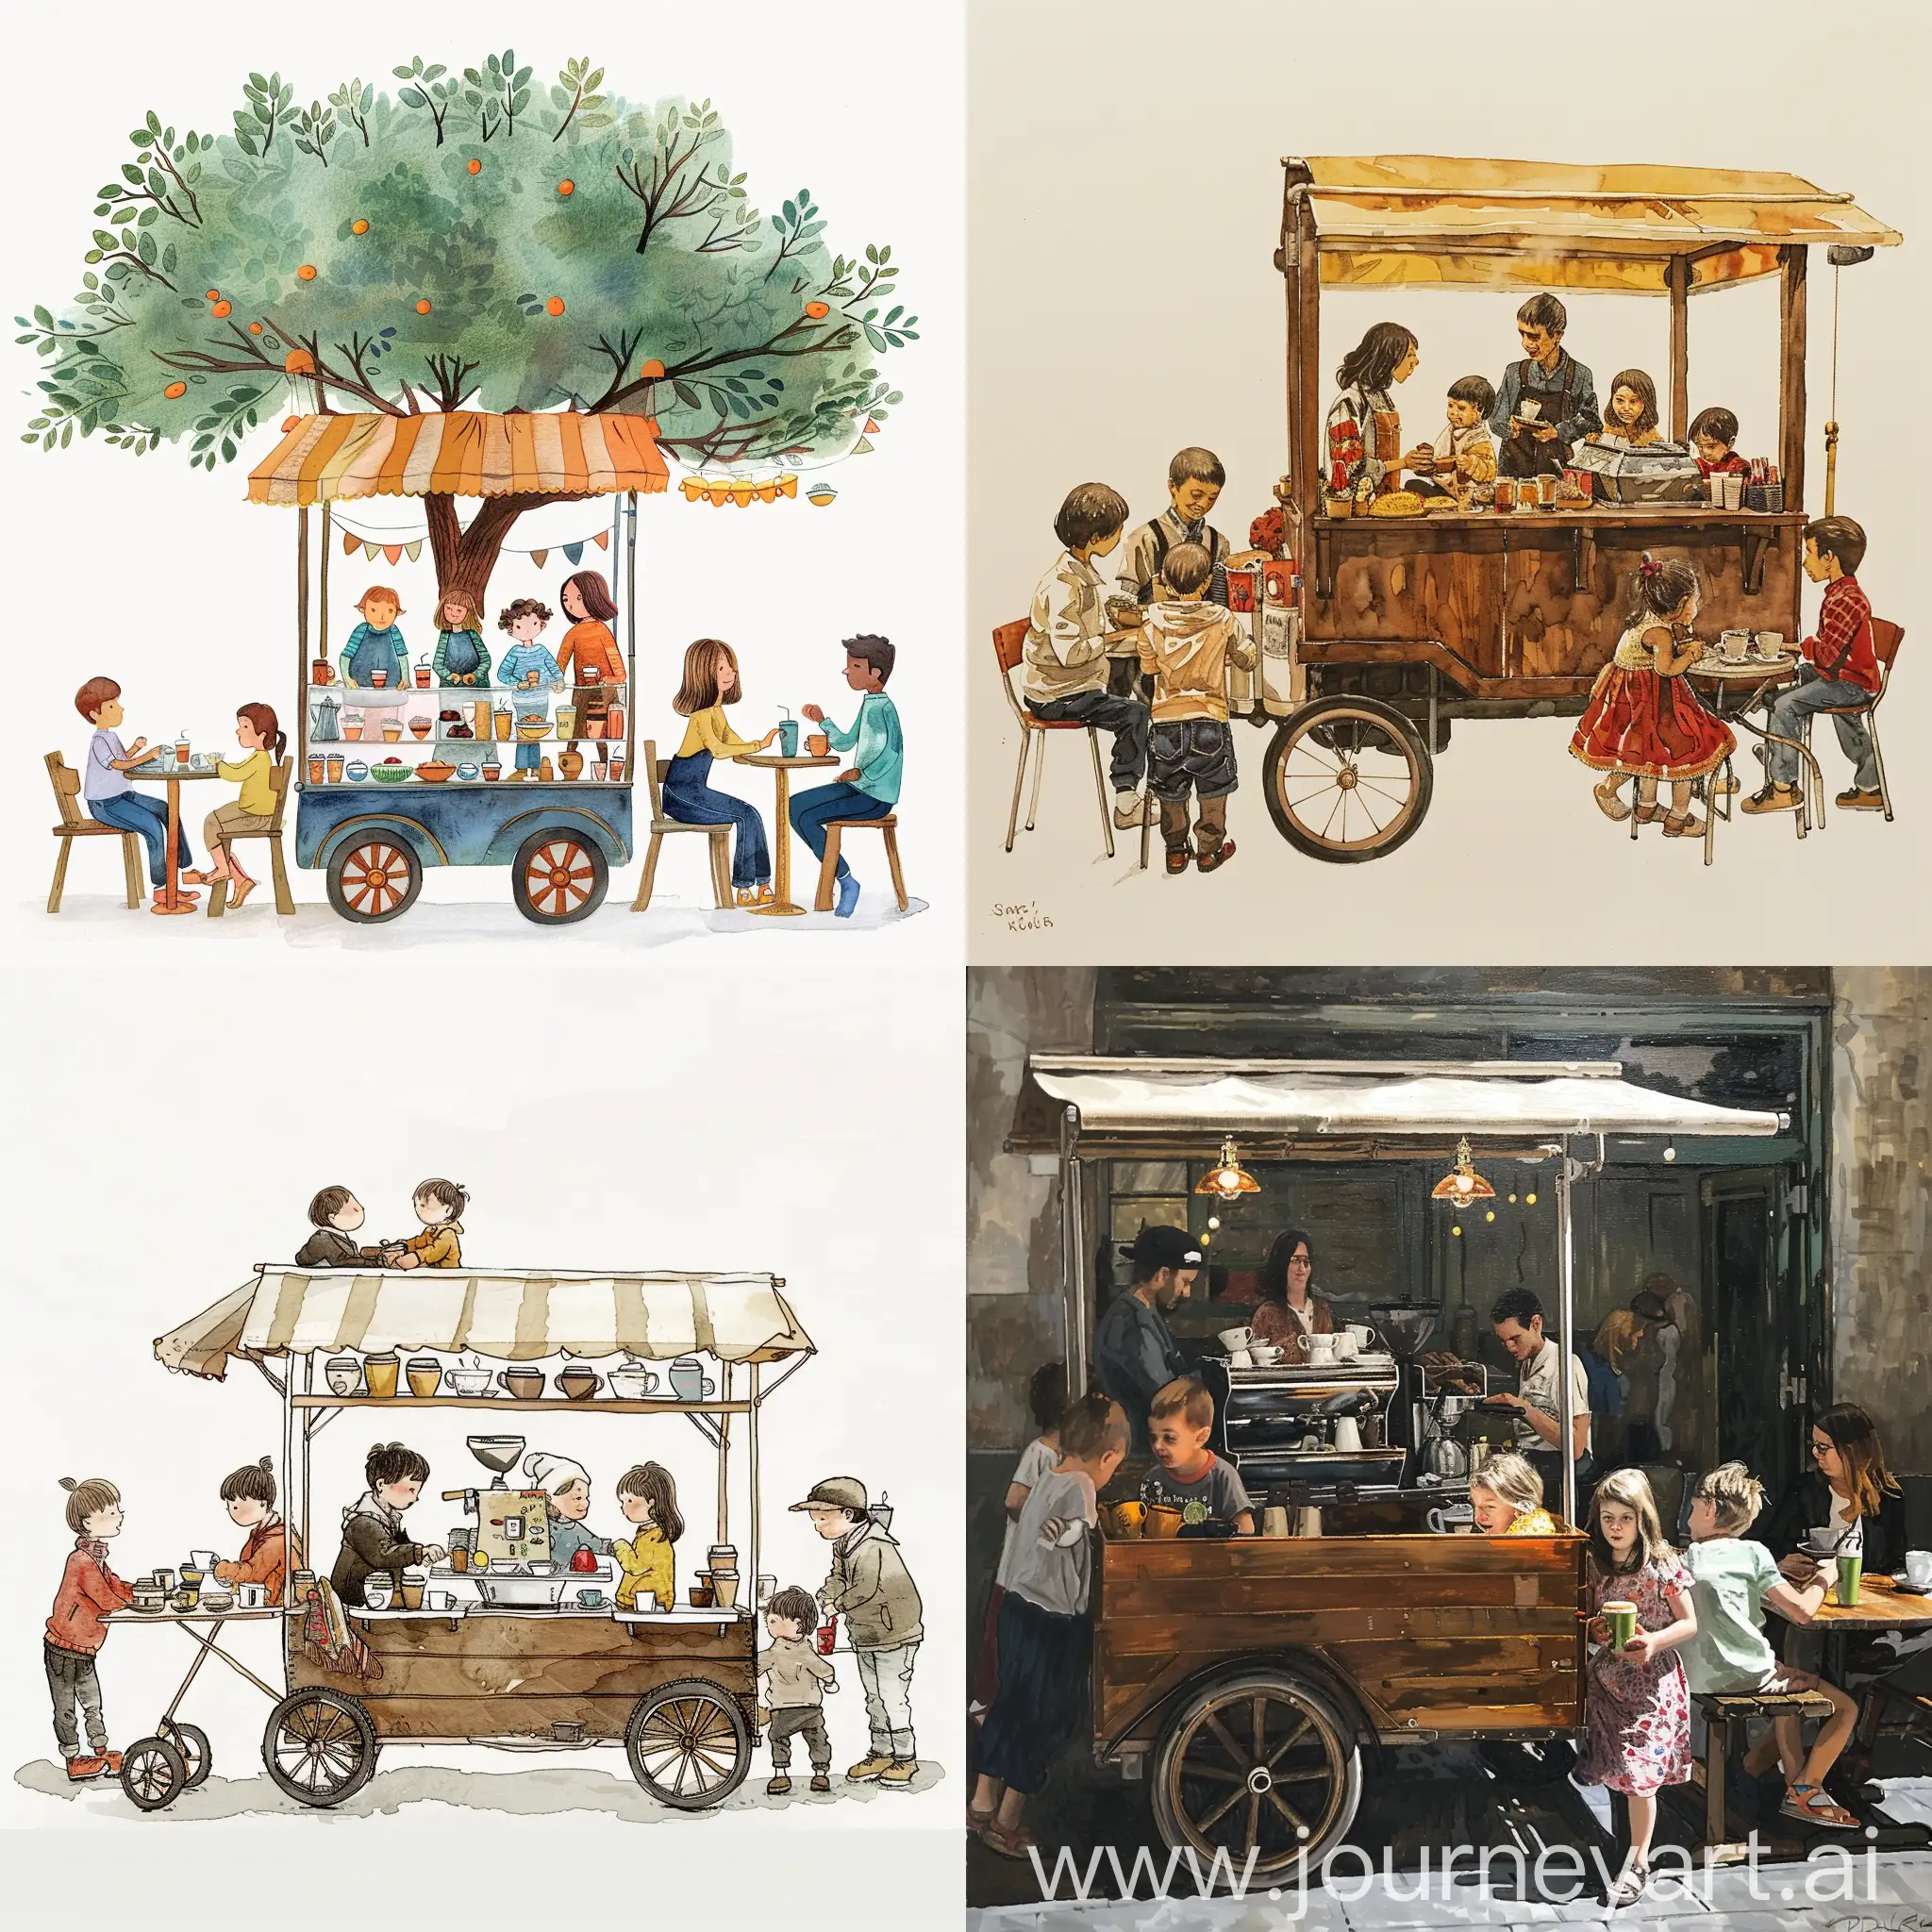 Create for me a picture of a coffee cart with children and people sitting around tables